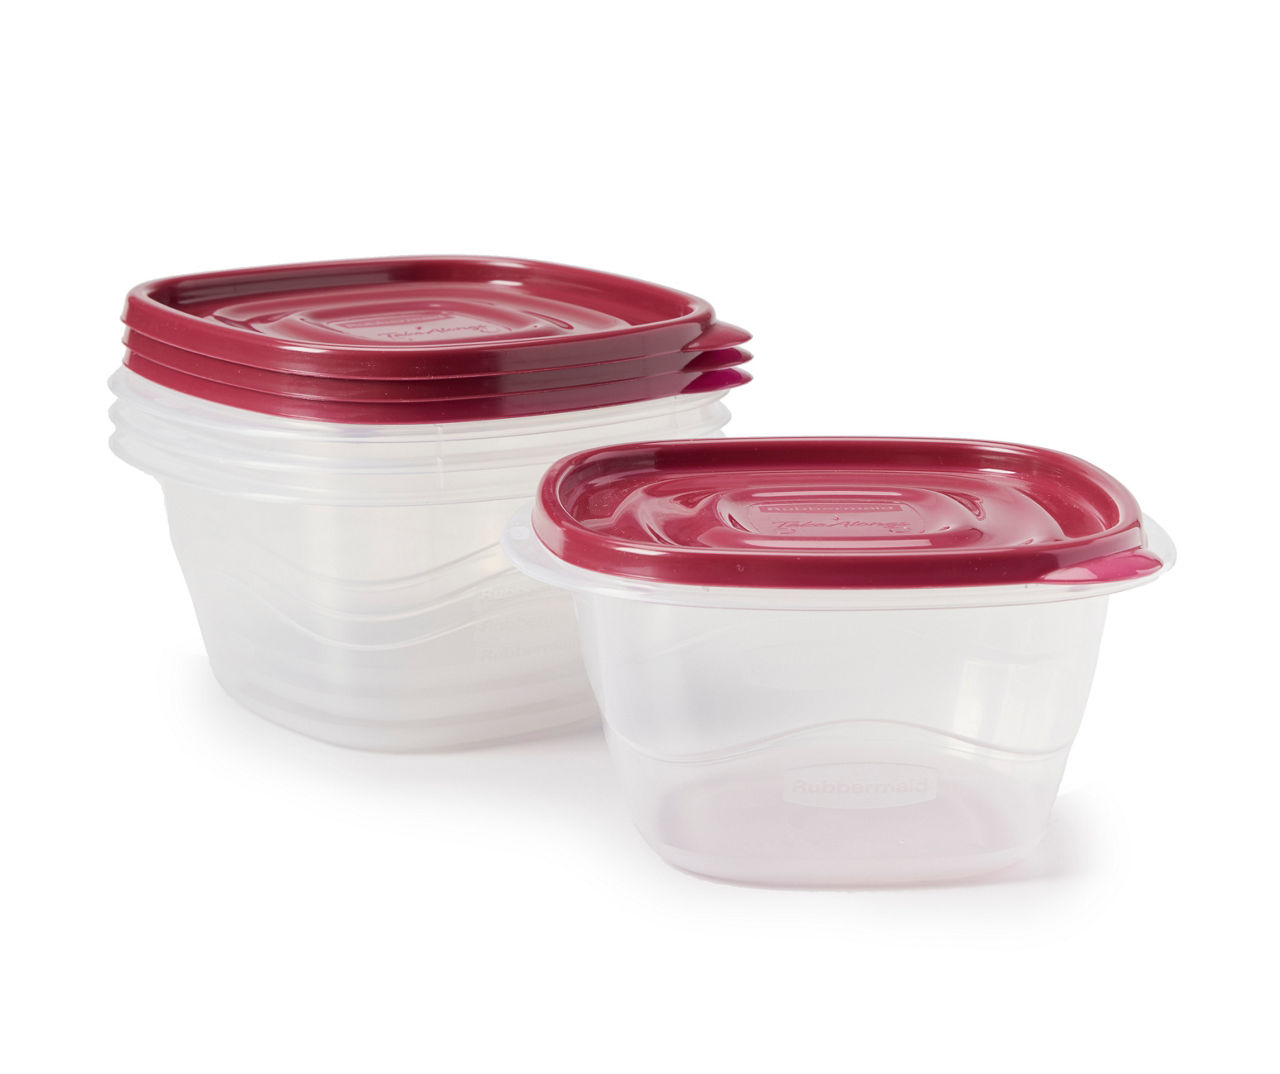 Rubbermaid Easy-Find Lid Food Storage Container, 5-Cups